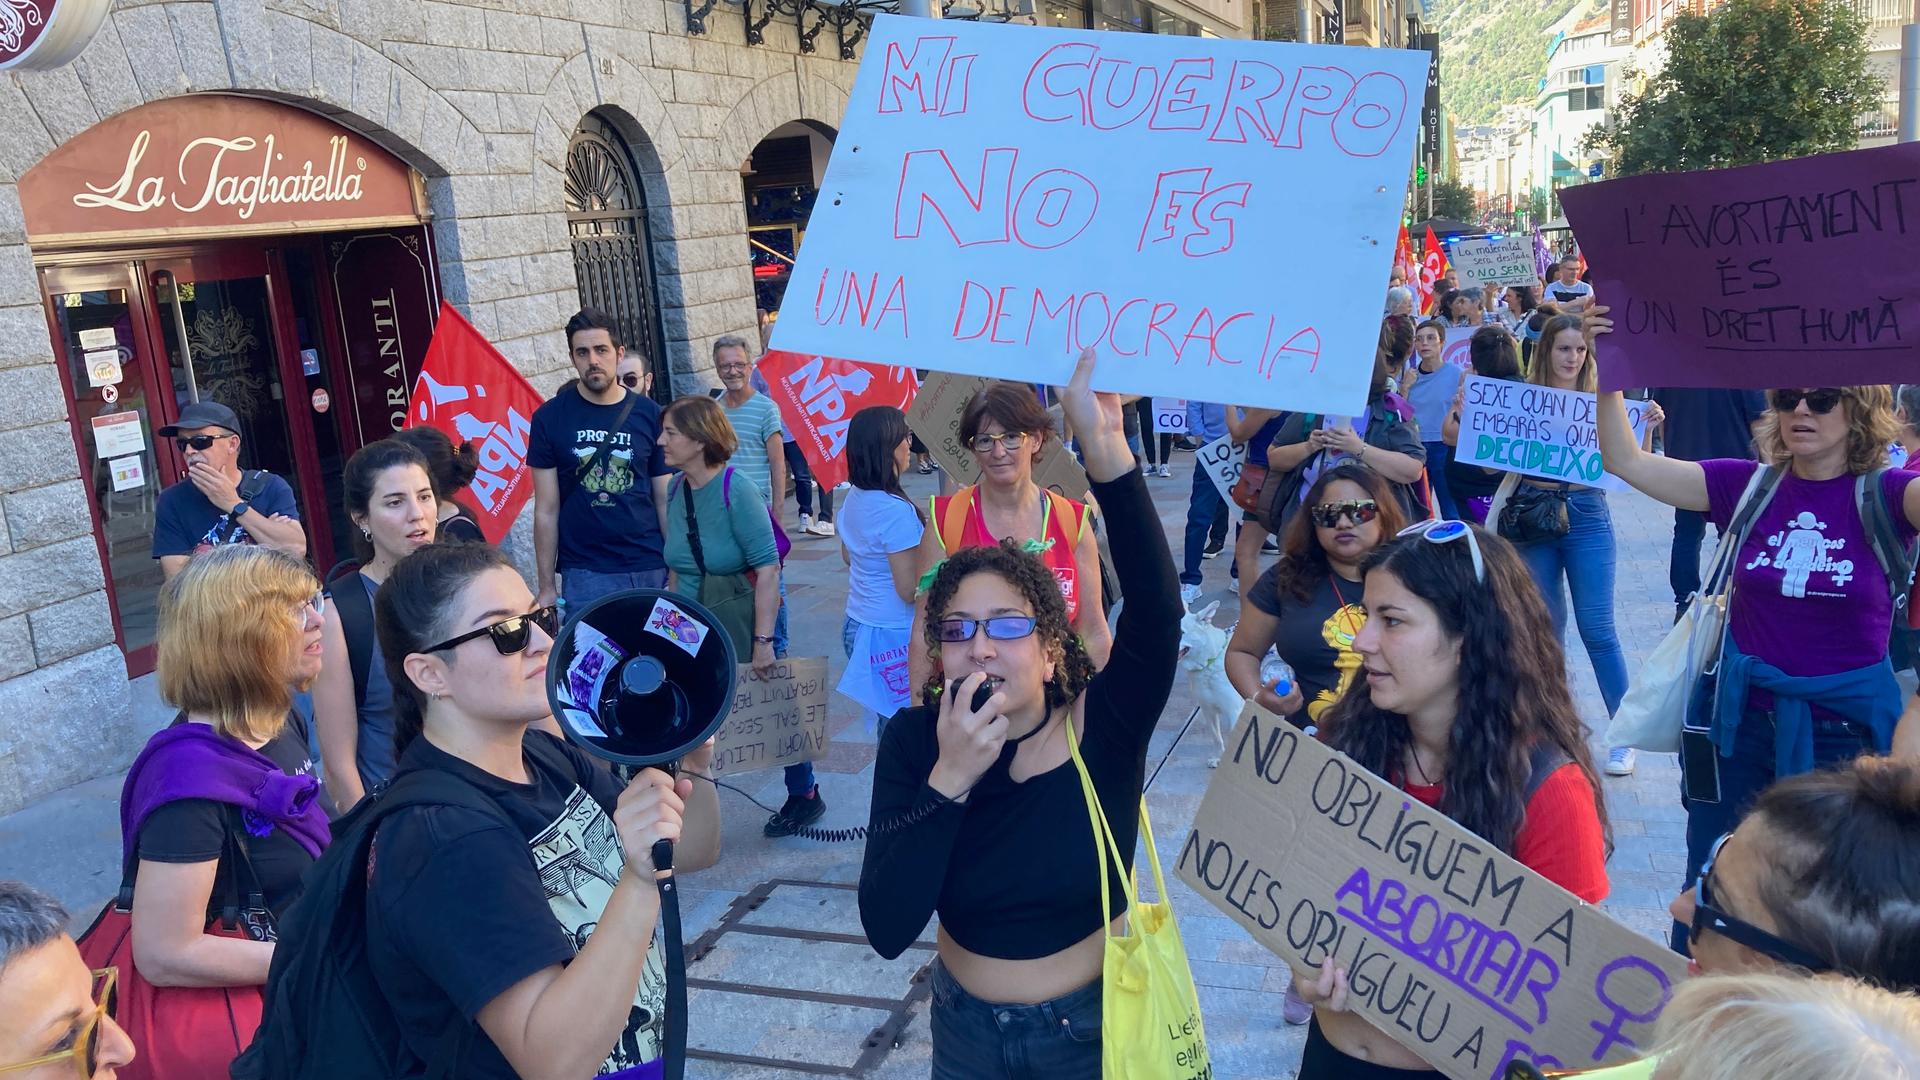 Women in a small group holding signs with text written in Spanish